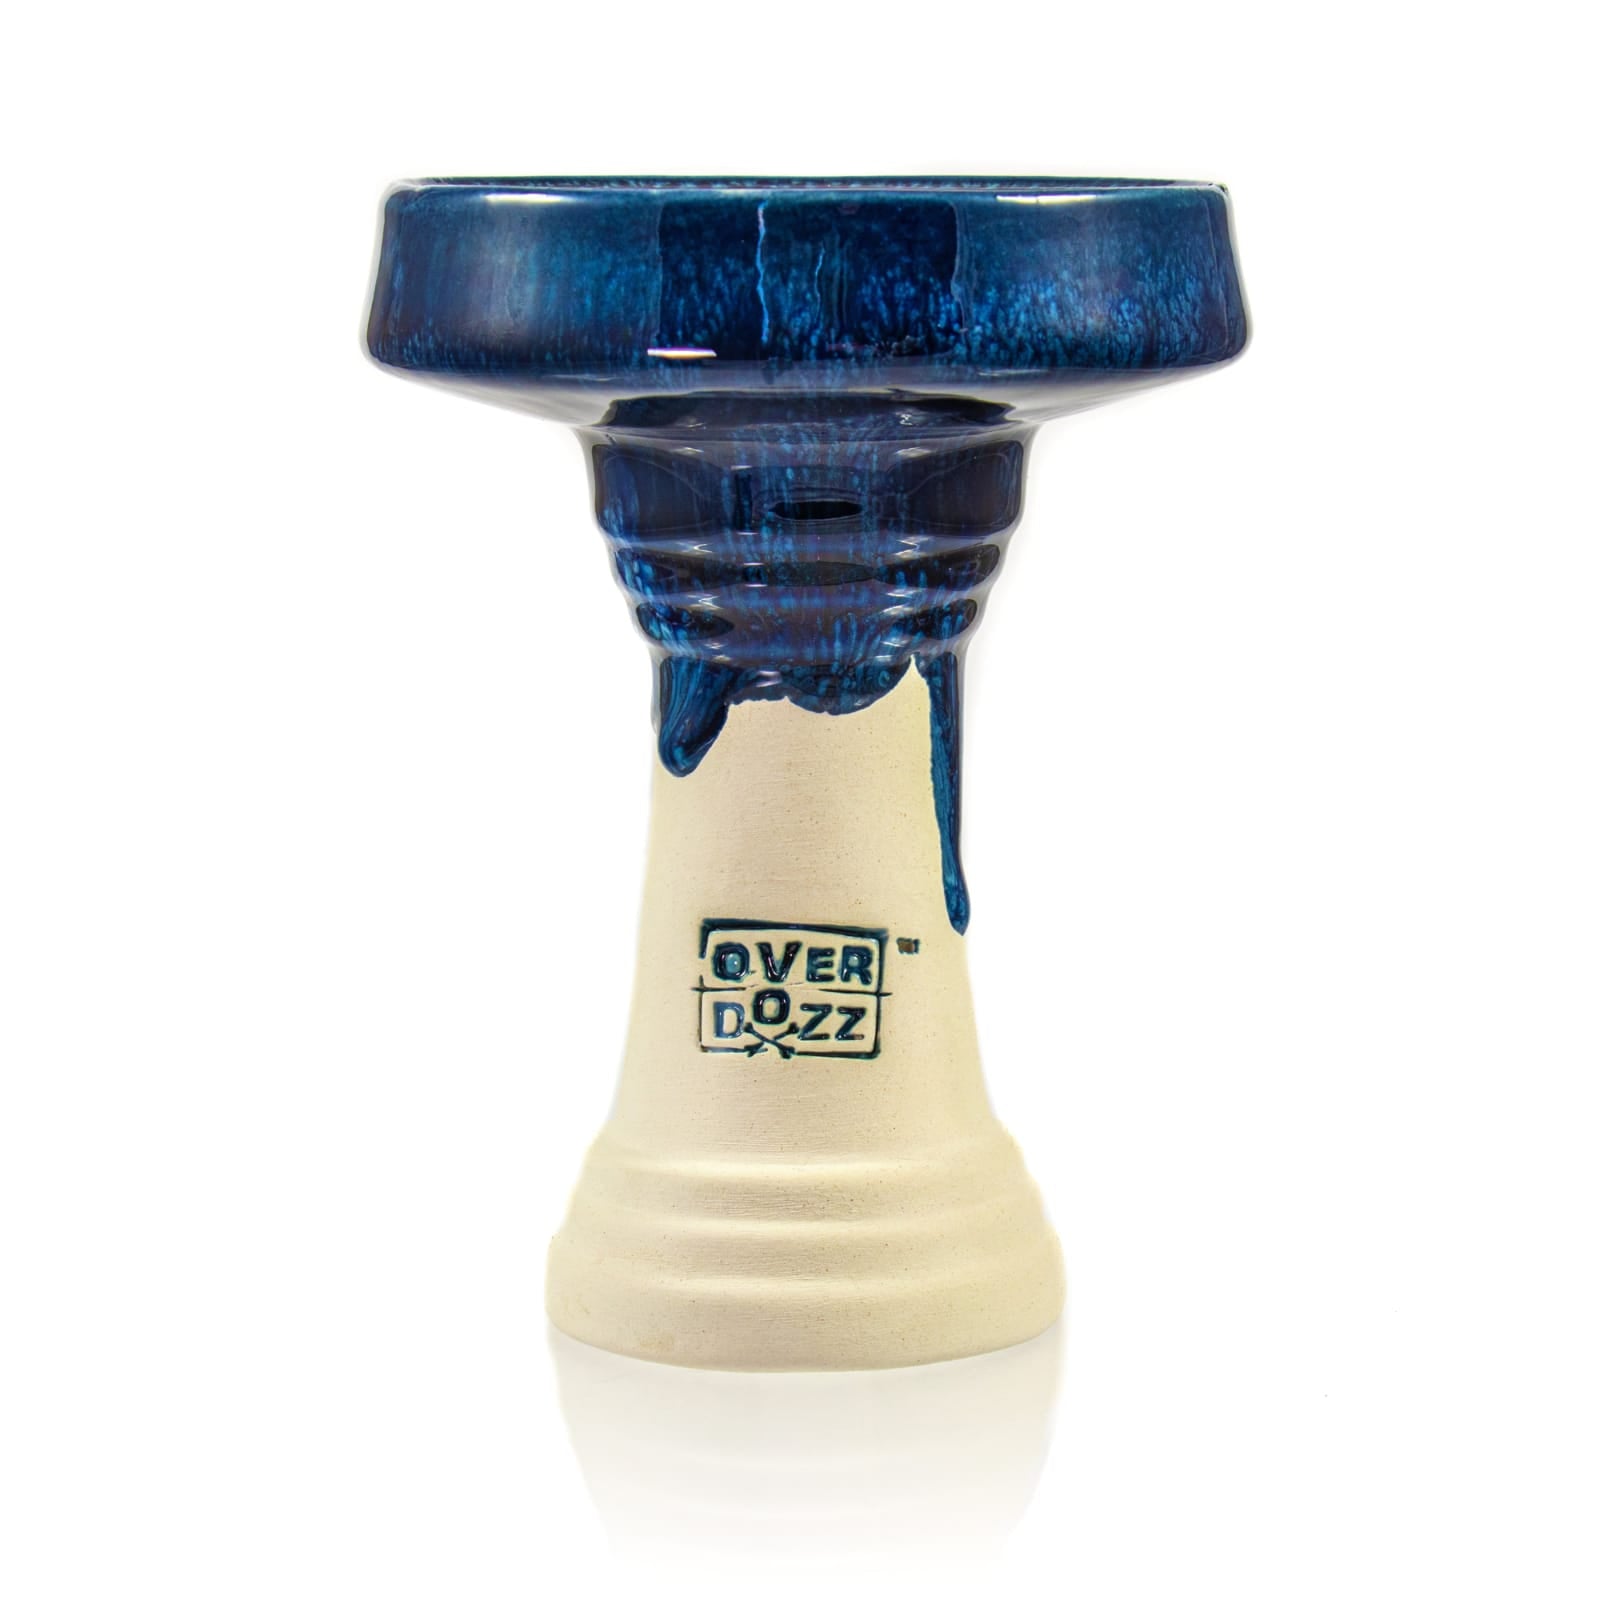 Overdozz Premium Phunnel Bowl G1 (Starbuzz Nar Compatible) - Blue Over White Clay